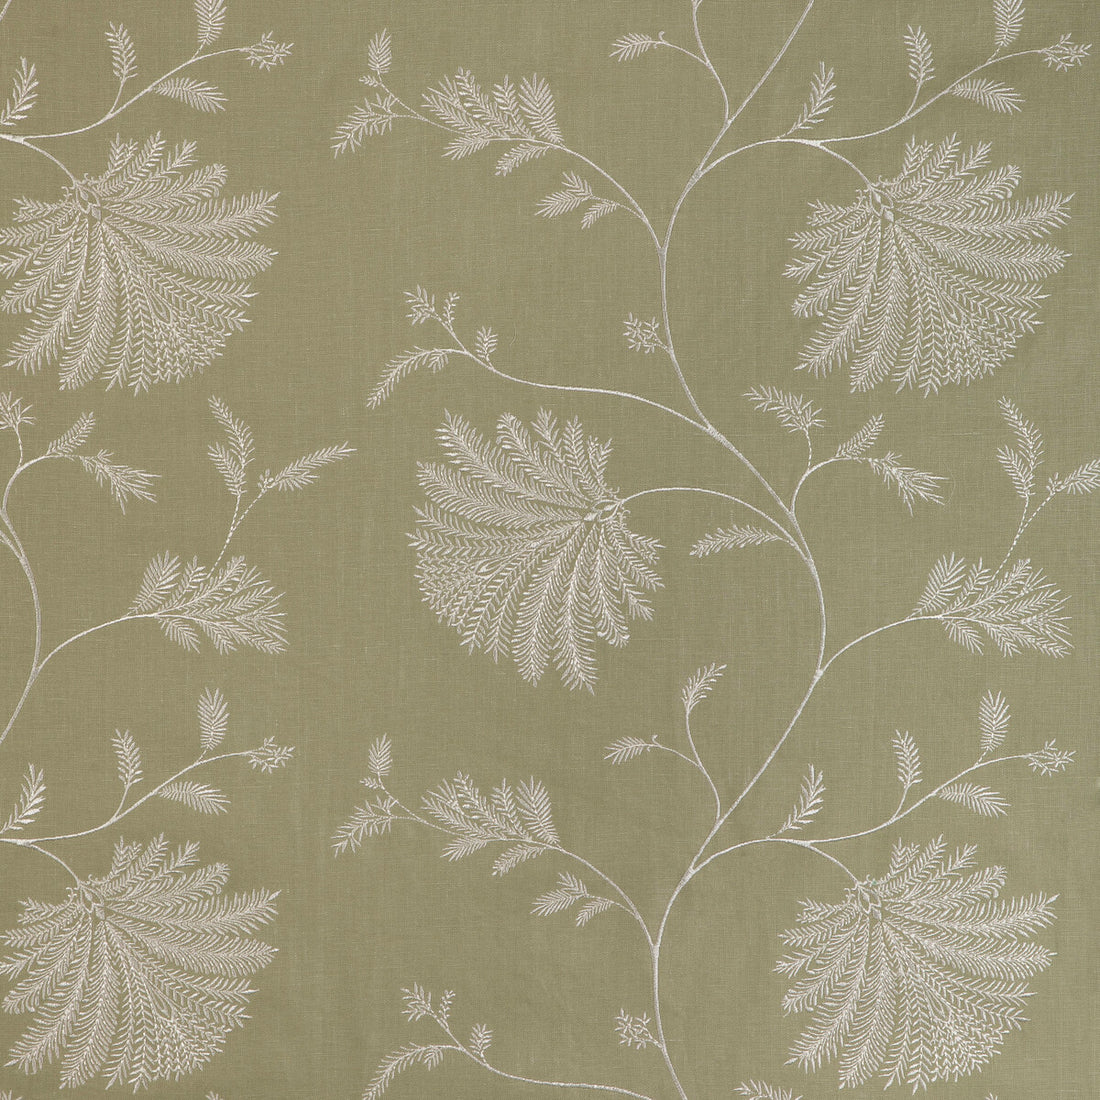 Maelle Emb fabric in celery color - pattern 8023116.23.0 - by Brunschwig &amp; Fils in the Anduze Embroideries collection